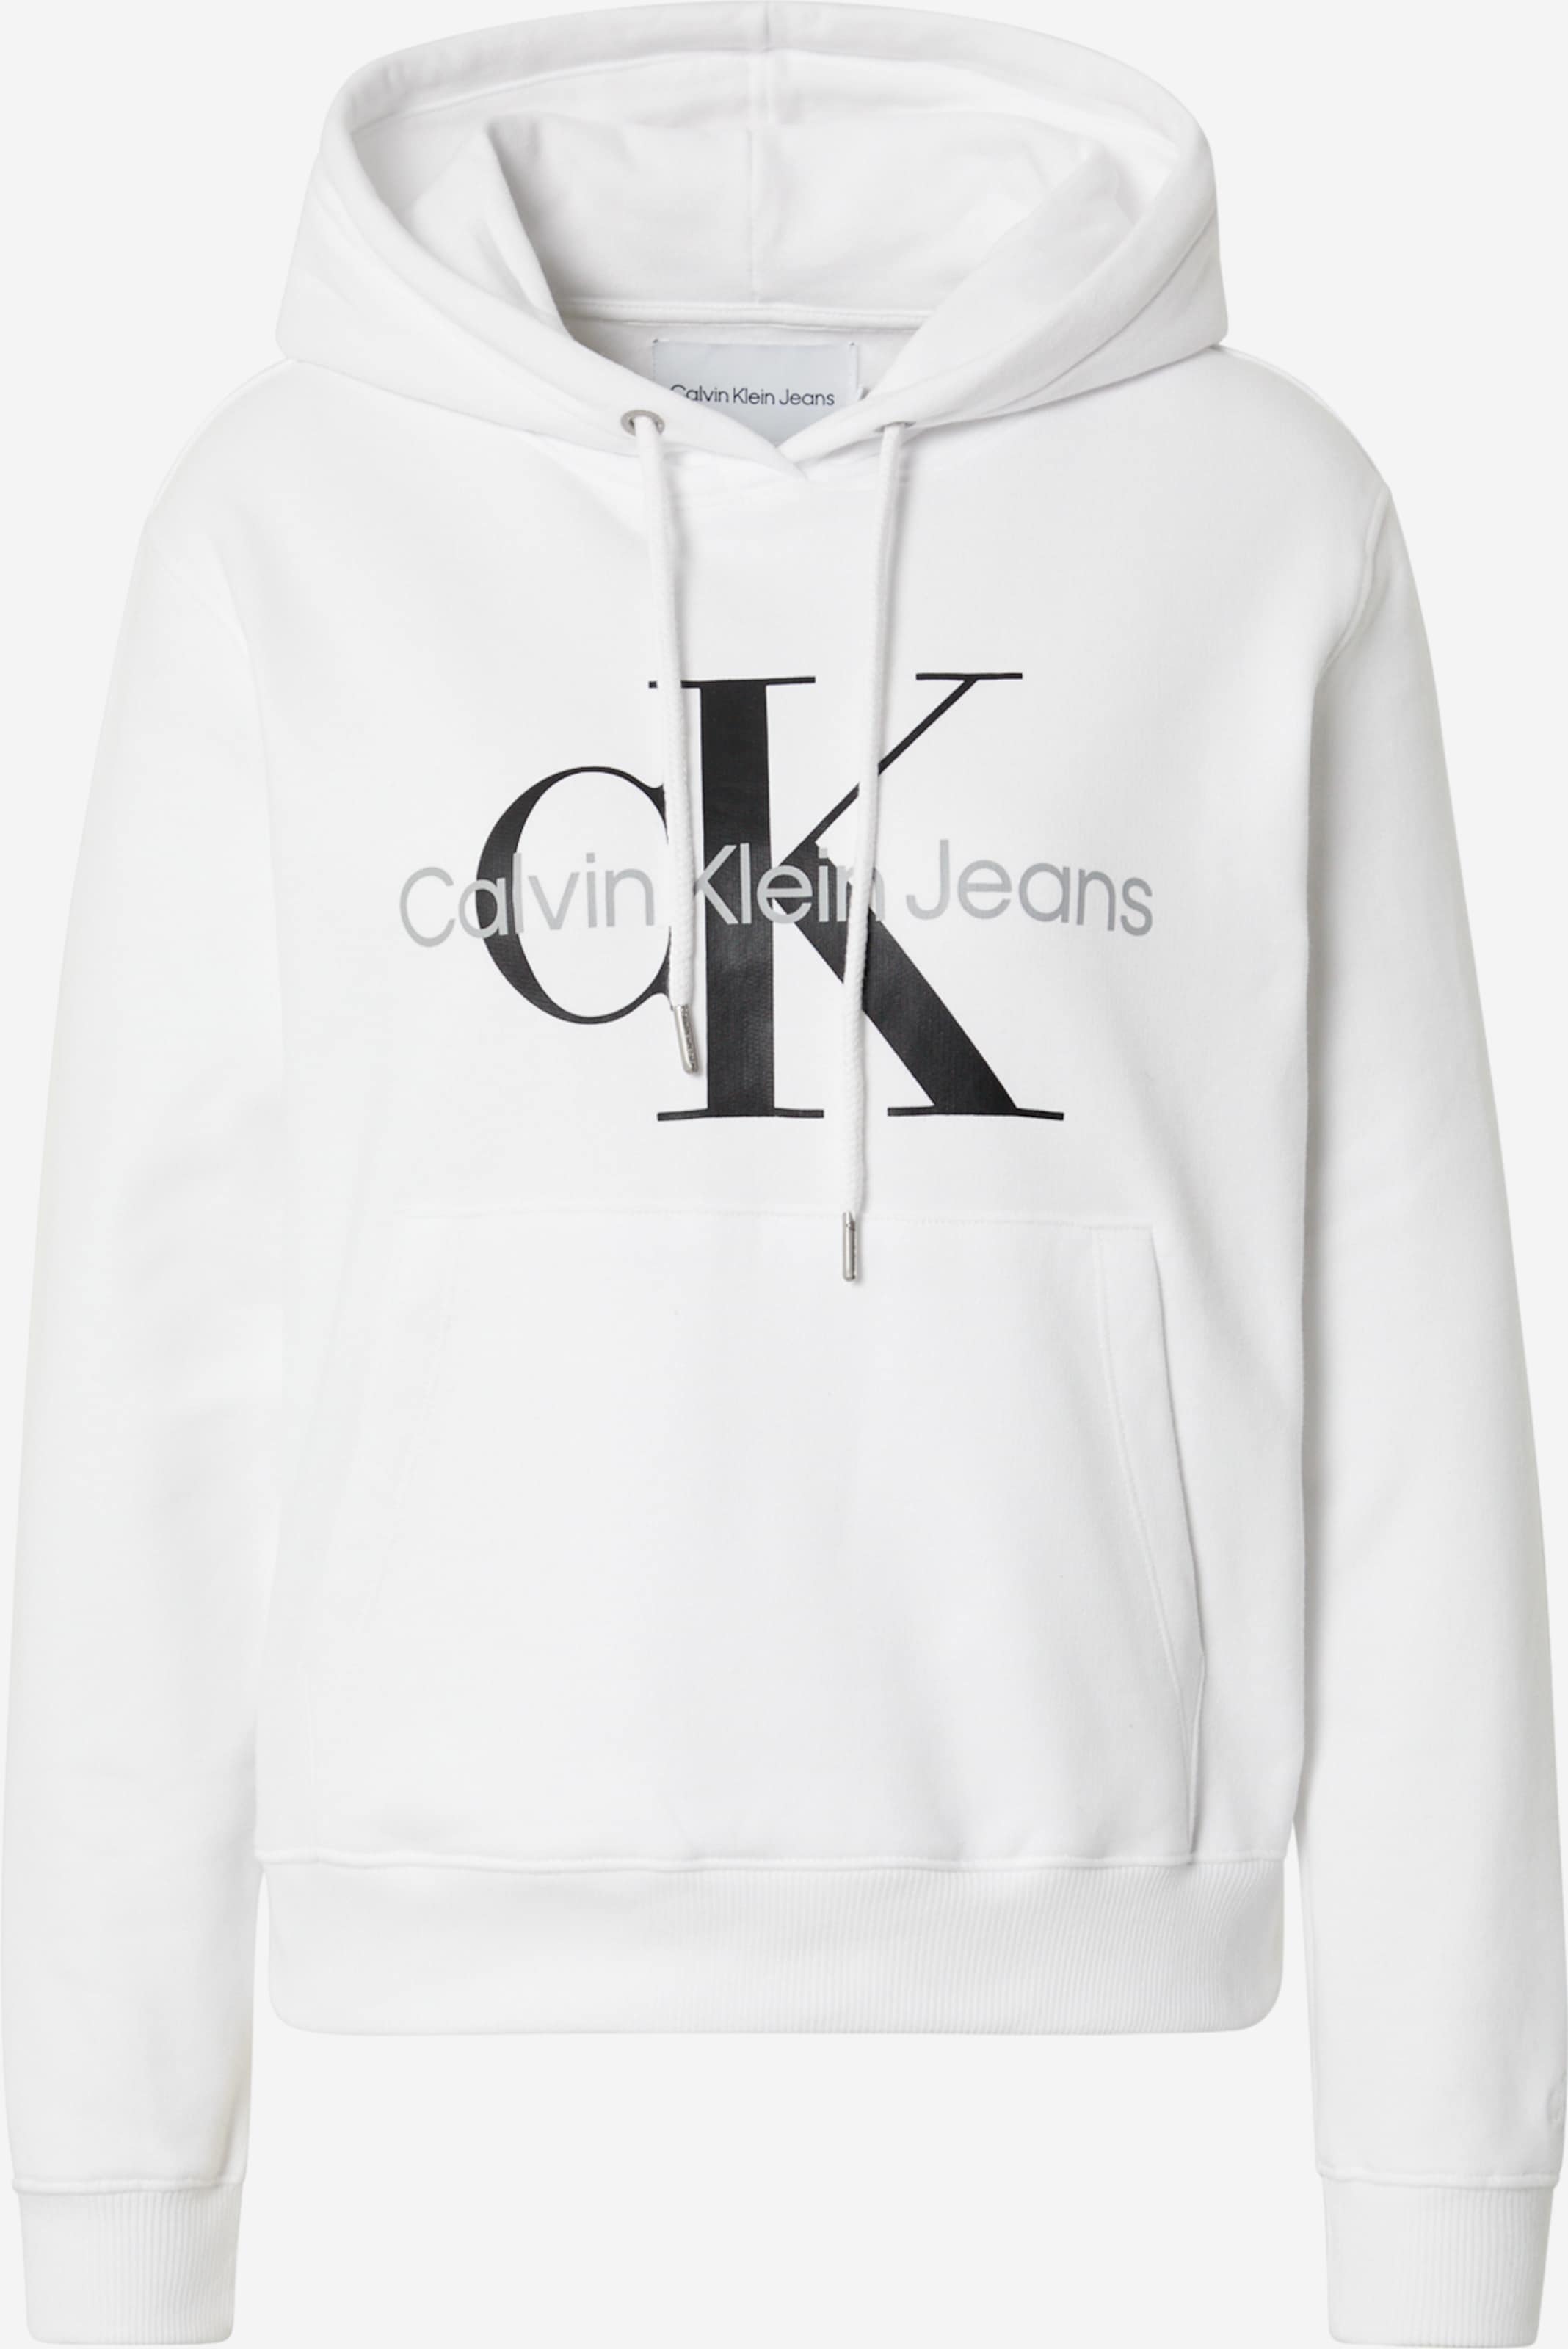 Calvin Klein Jeans Sweatshirt in White | ABOUT YOU